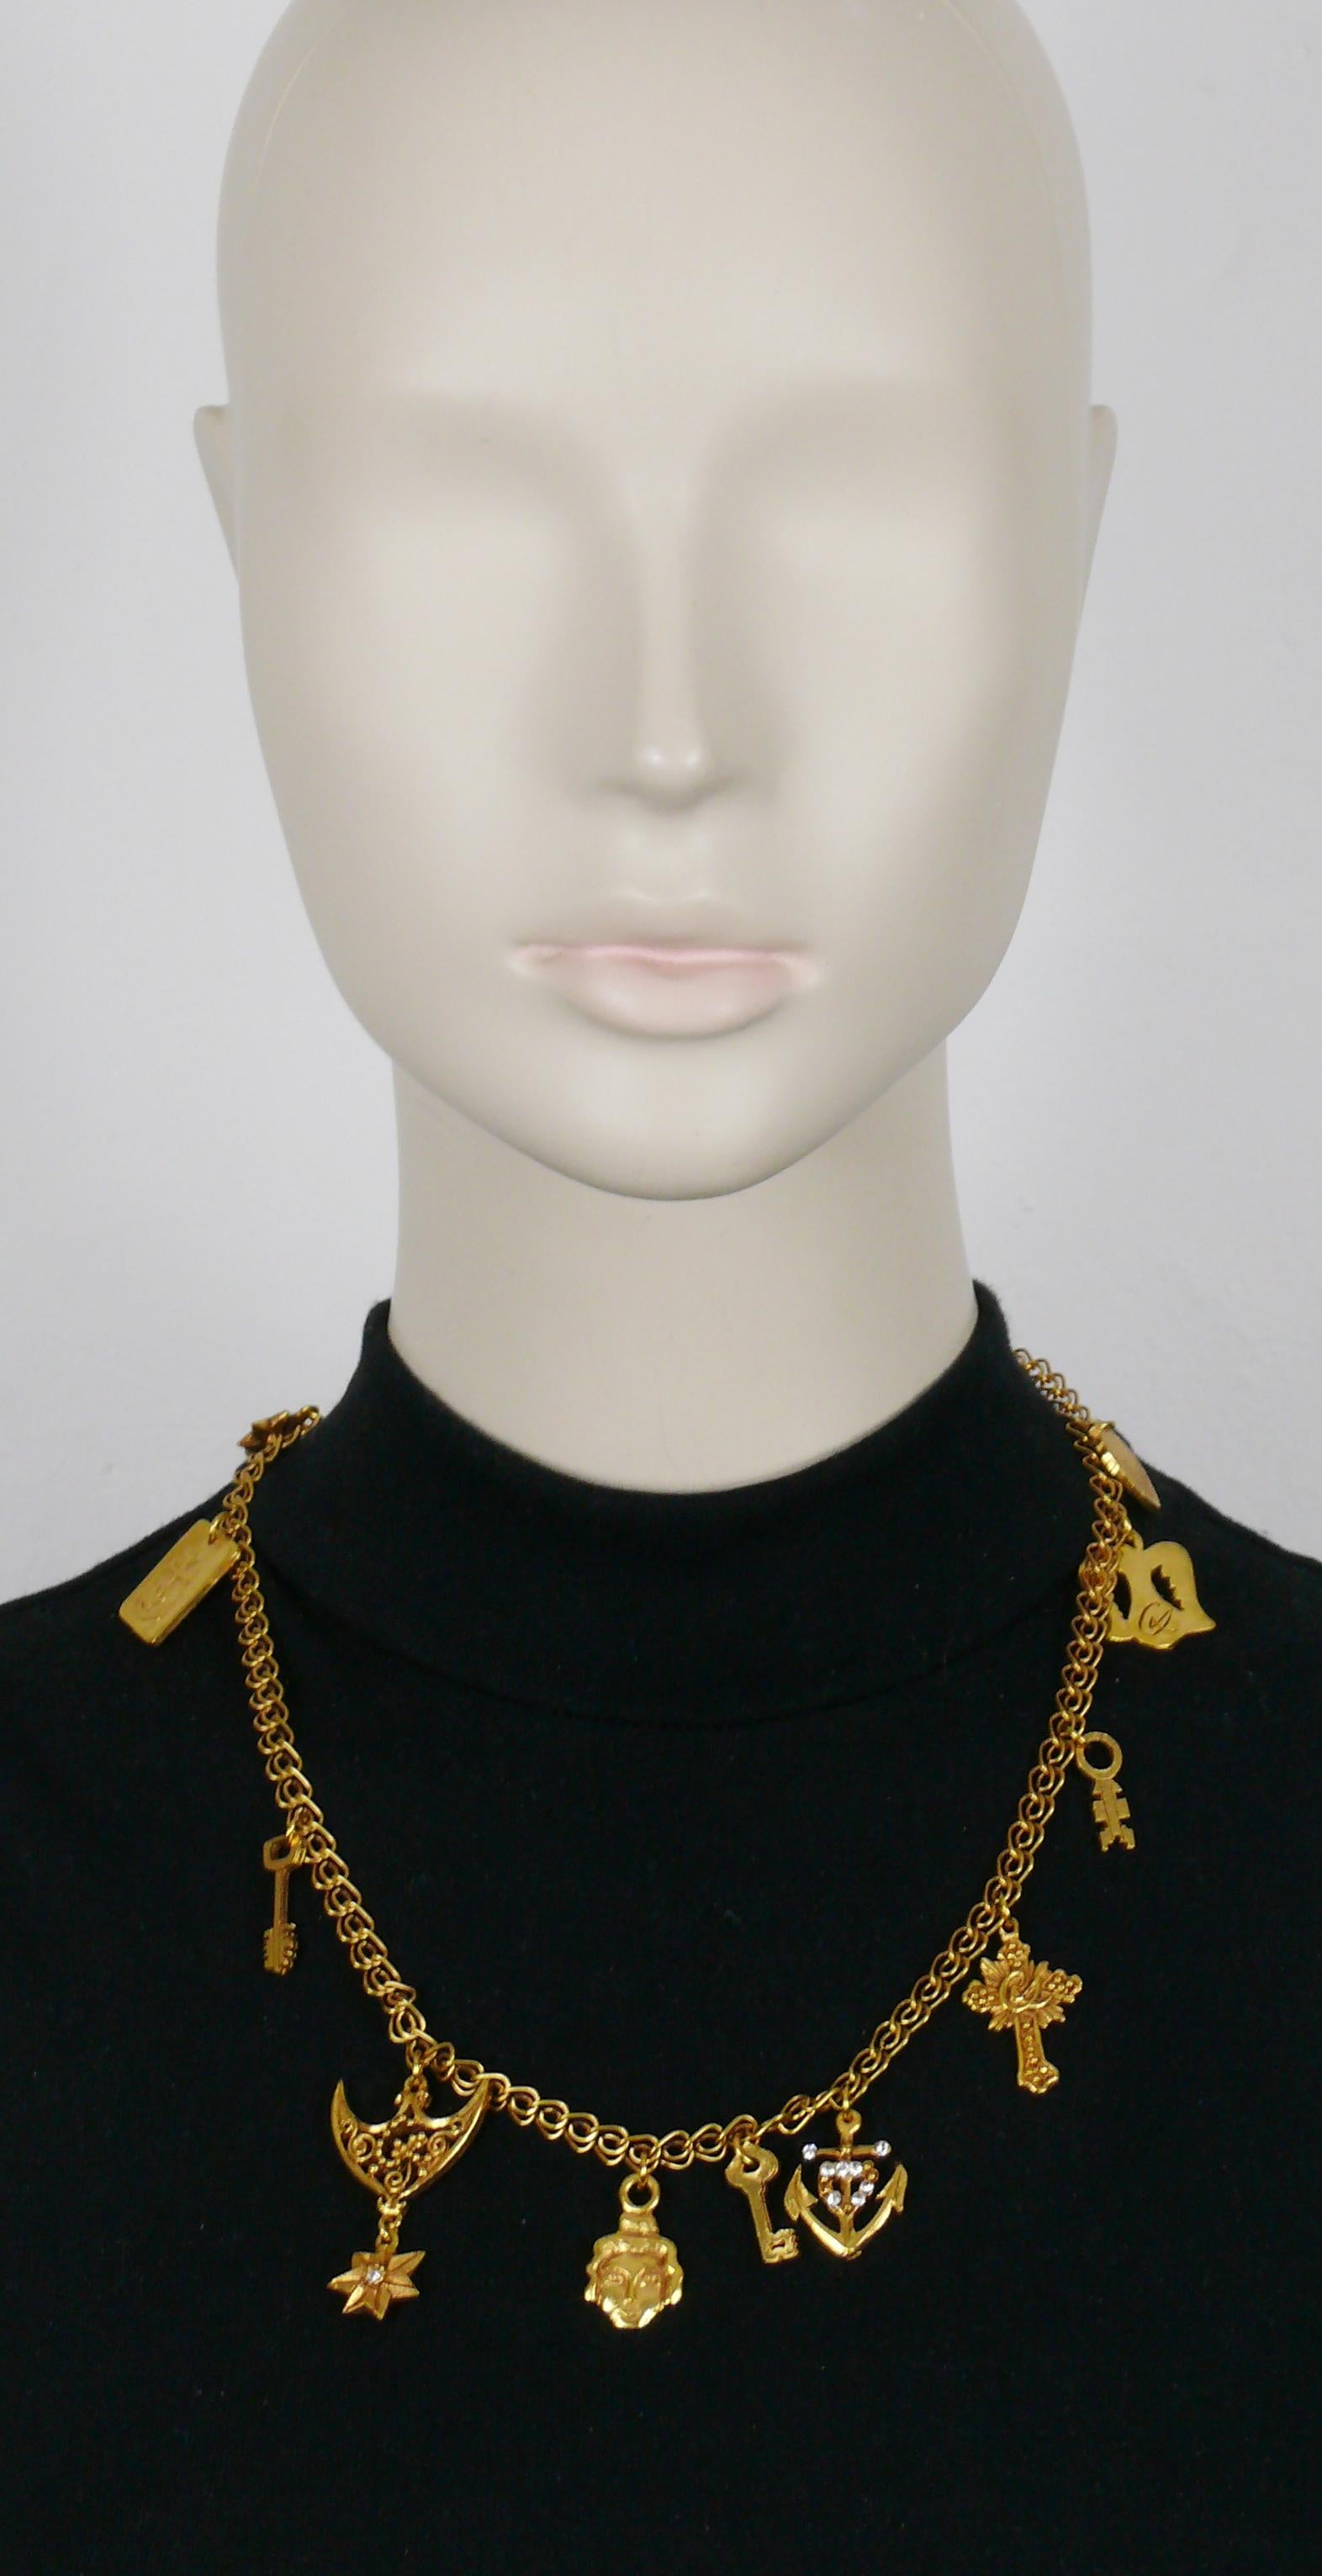 CHRISTIAN LACROIX vintage gold tone charm necklace.

Lobster clasp closure.

Marked CHRISTIAN LACROIX CL Made in France.

Indicative measurements :  length approx. 52 cm (20.47 inches).

Material : Gold tone metal hardware / Crystal.

NOTES
- This